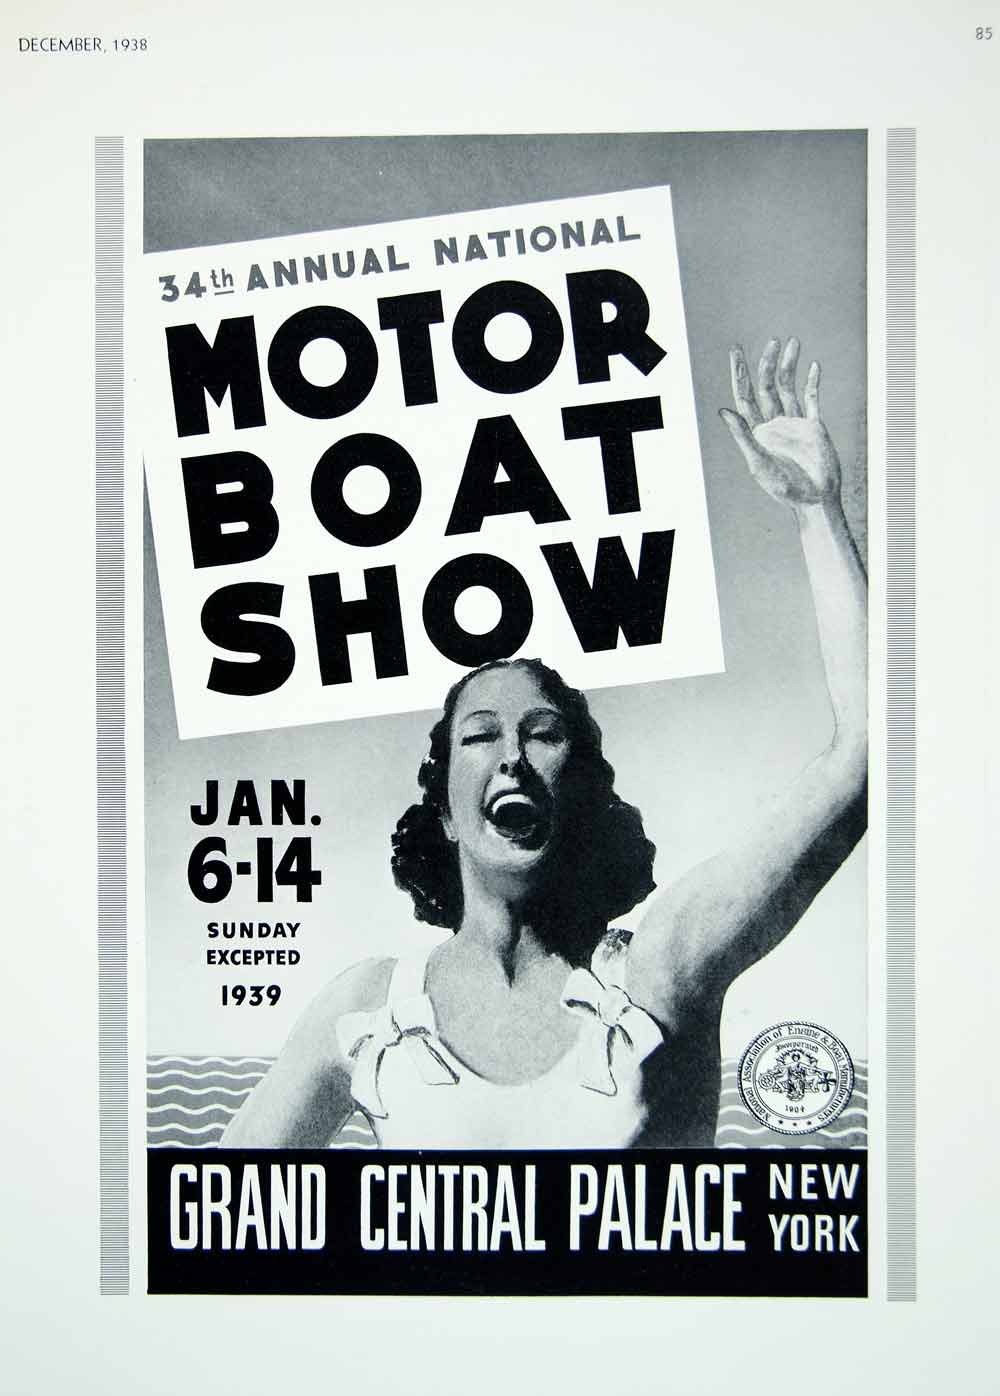 1938 Ad Annual National Motor Boat Show Jan. 1939 Grand Central Palace NYC YYM4